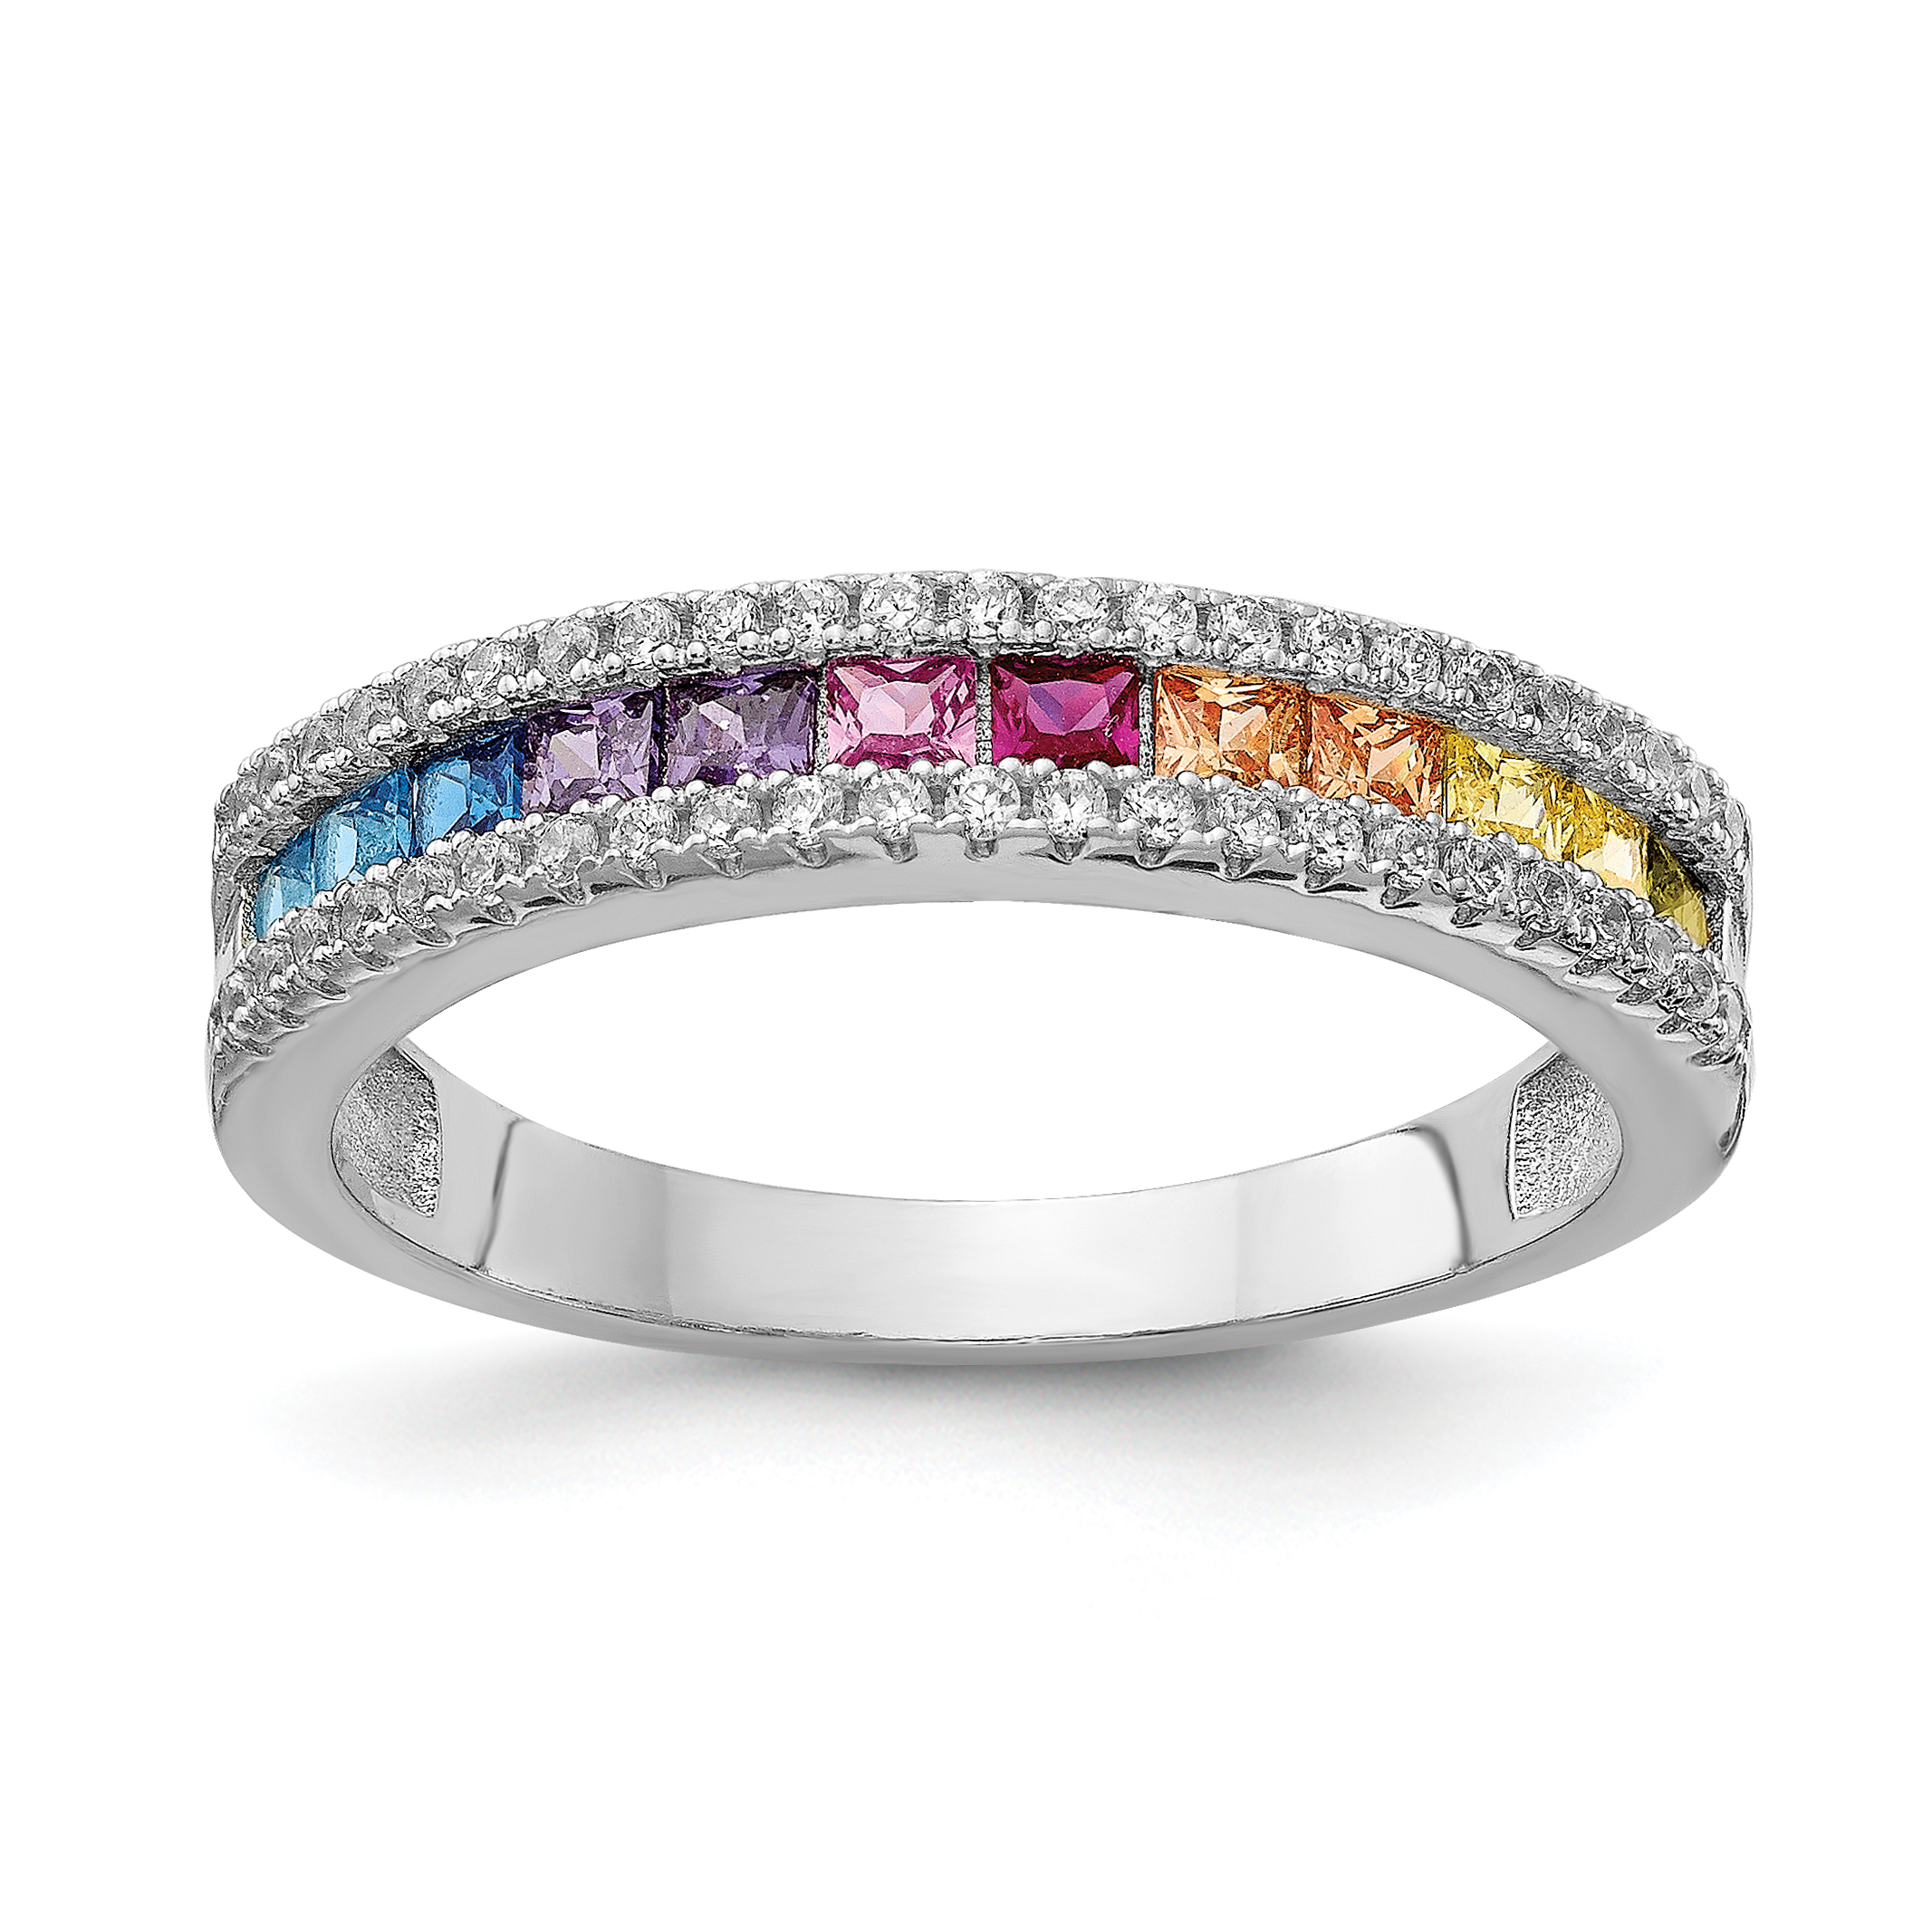 Prizma Sterling Silver Rhodium-plated Princess White and Colorful